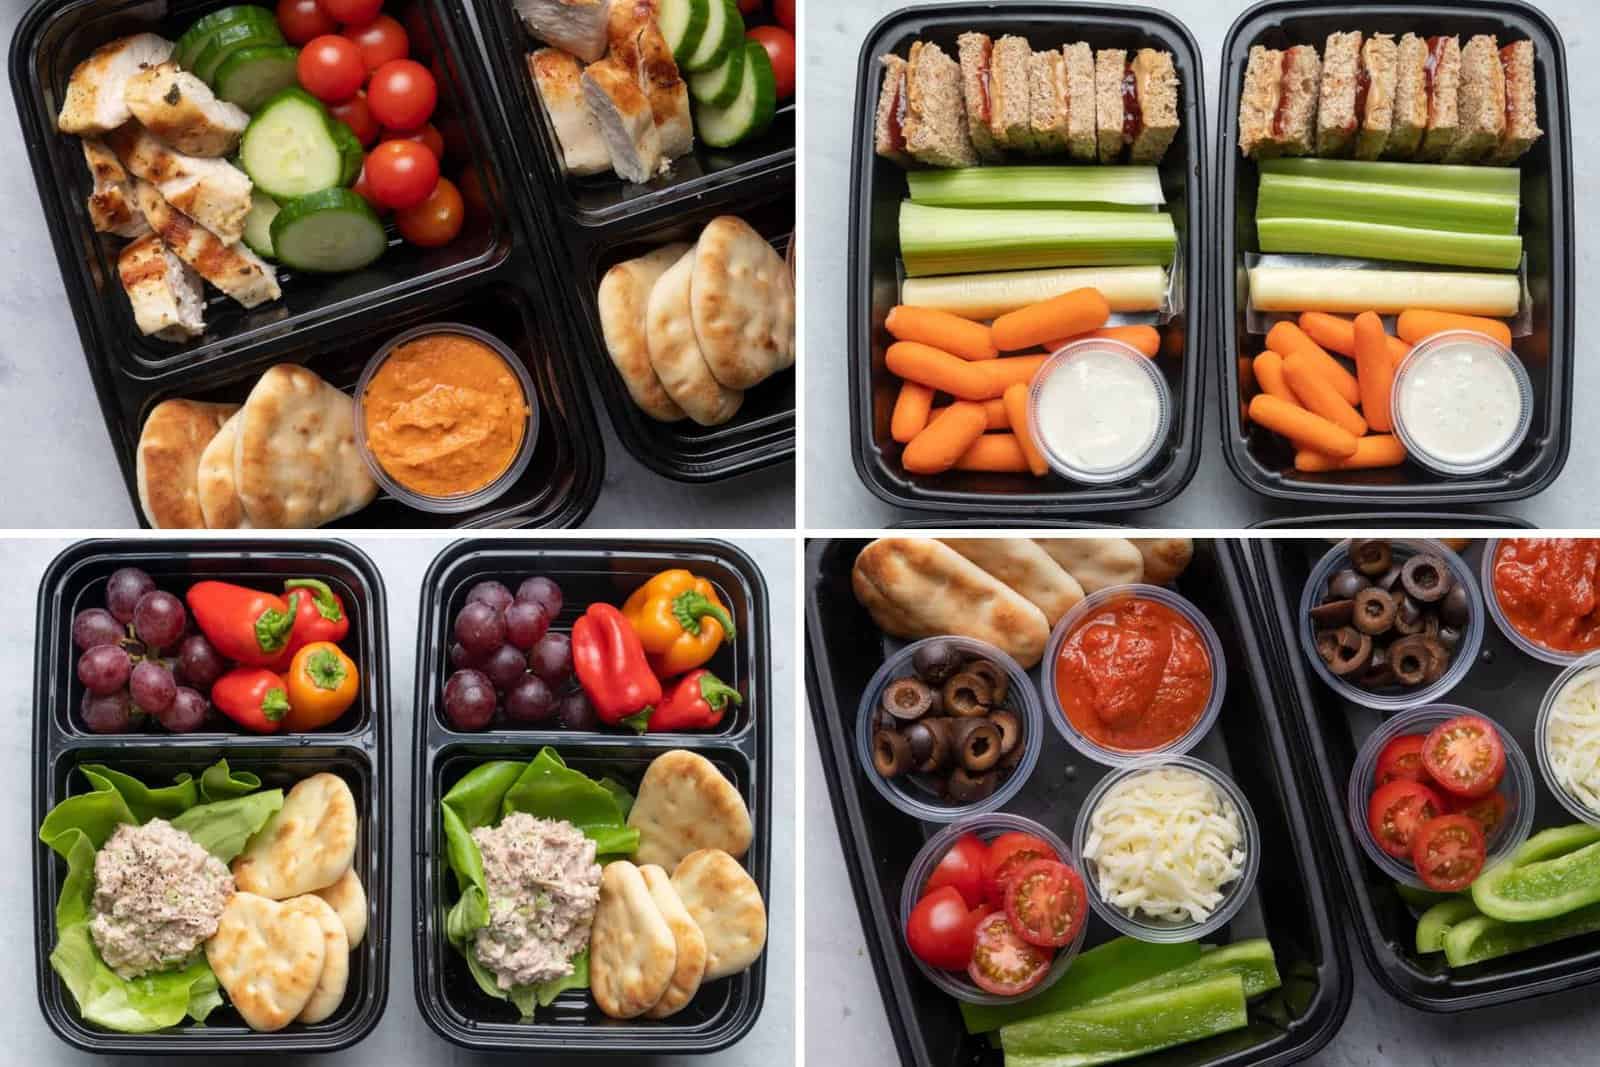 40 Packed Lunch Ideas for School or Work - FeelGoodFoodie